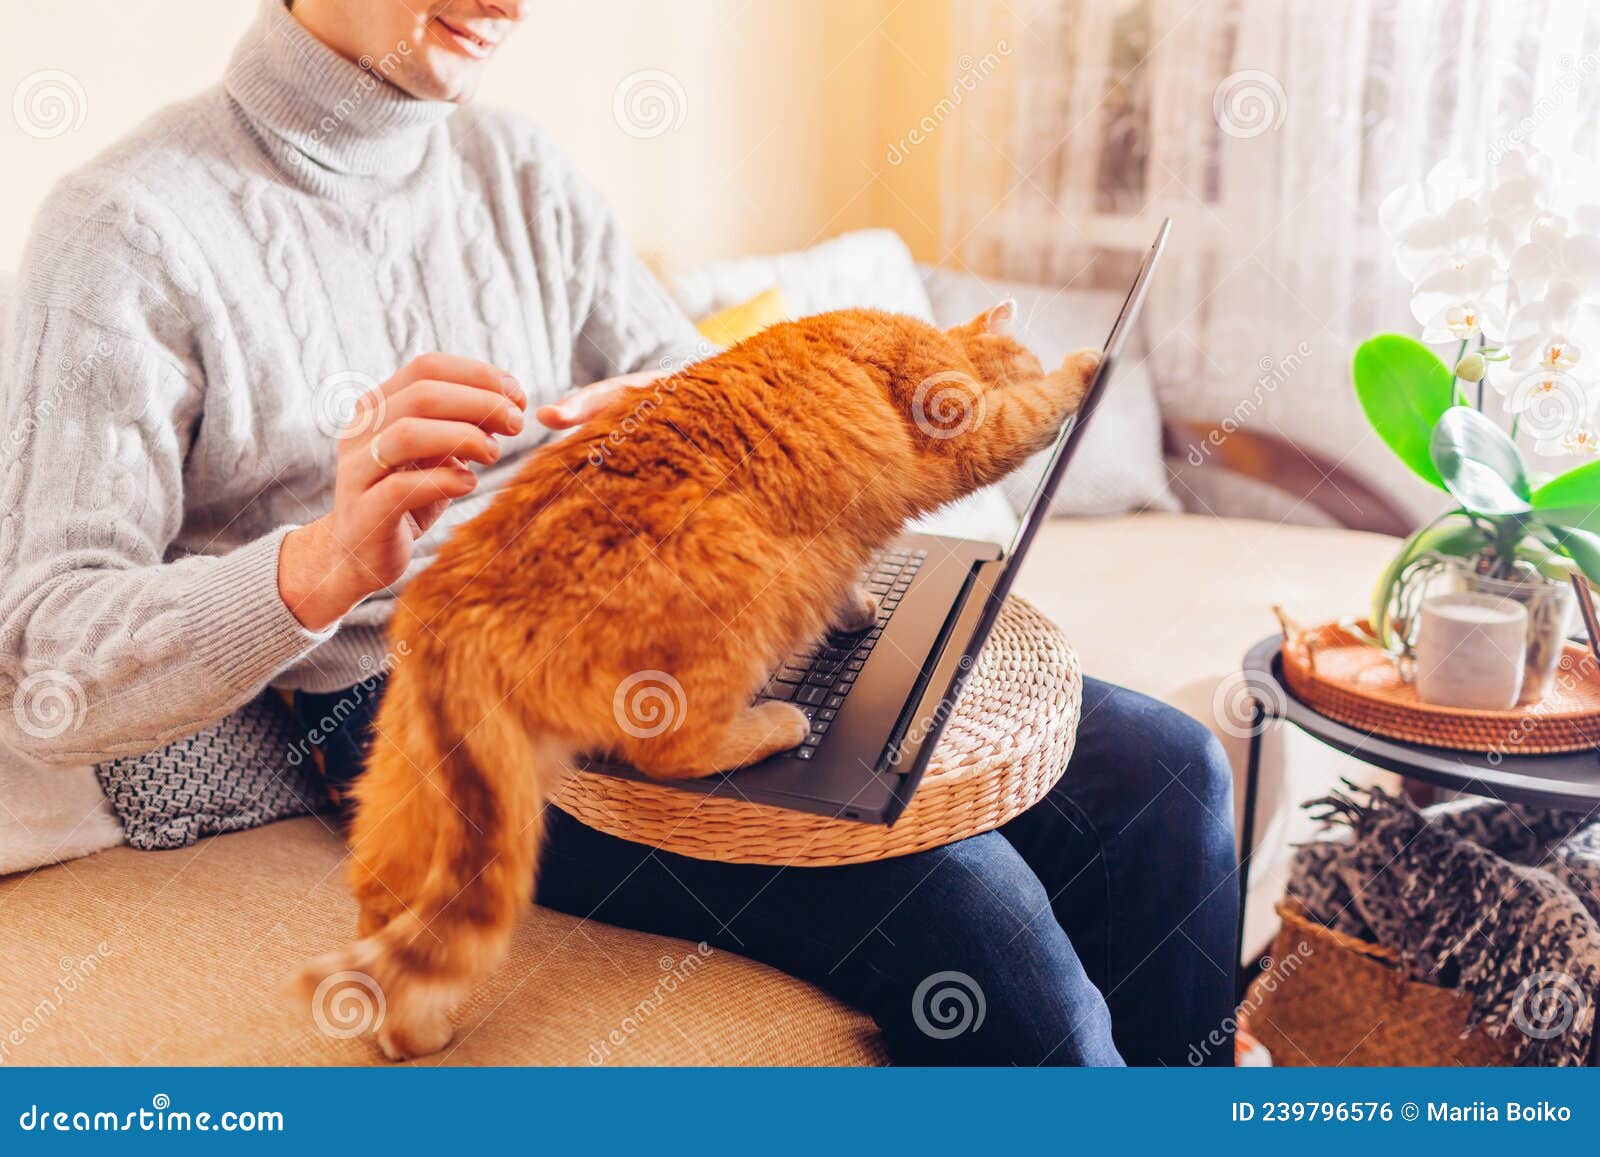 Man Working Online from Home with Pet Using Laptop. Ginger Cat Touching  Screen with Paw Playing with Image on Computer. Stock Photo - Image of  people, digital: 239796576